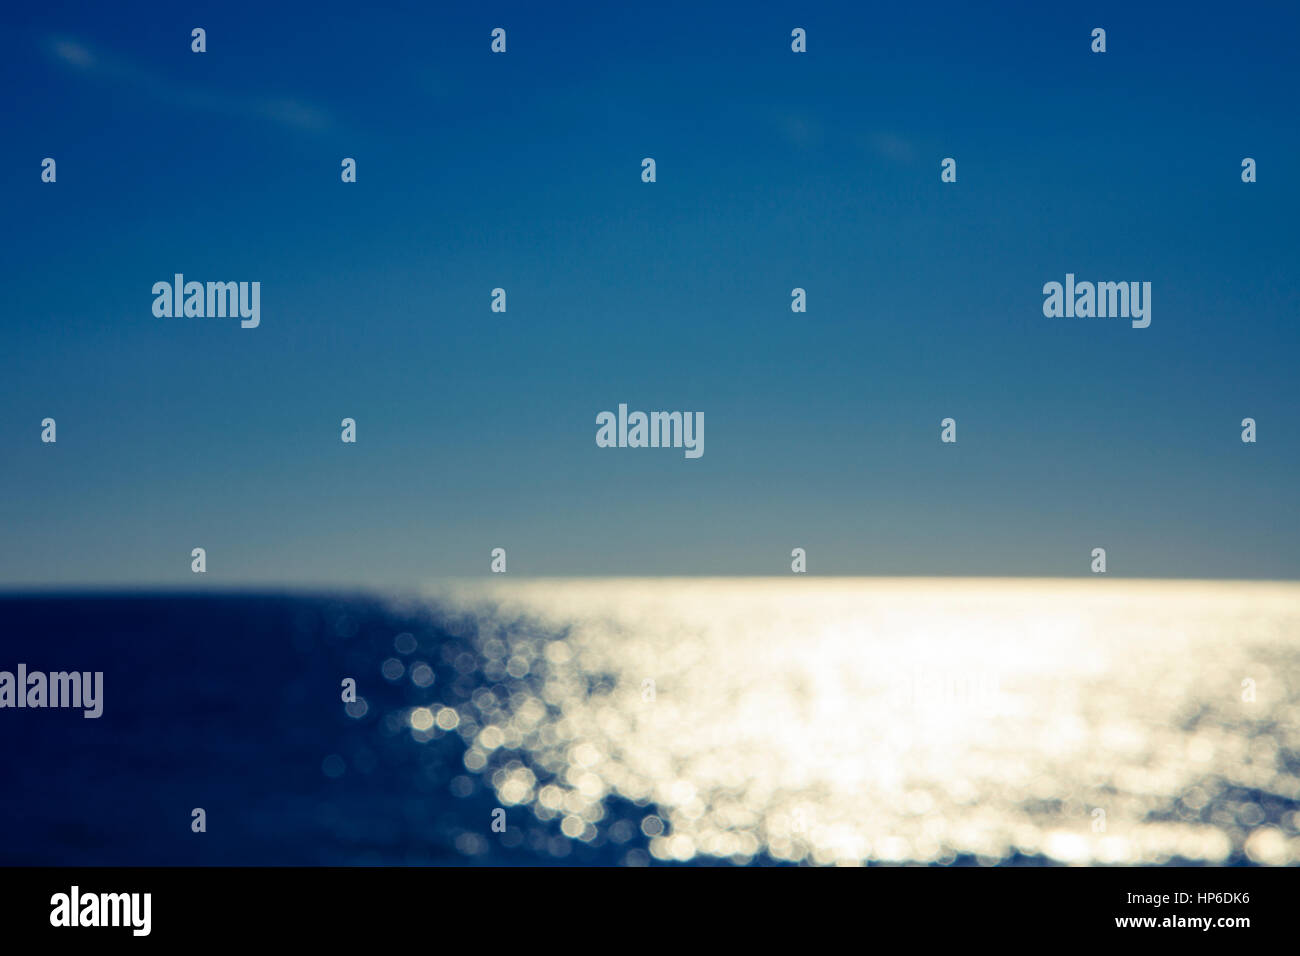 Blurred abstract ocean background. Sunlight reflecting on water. Bokeh effect. Stock Photo